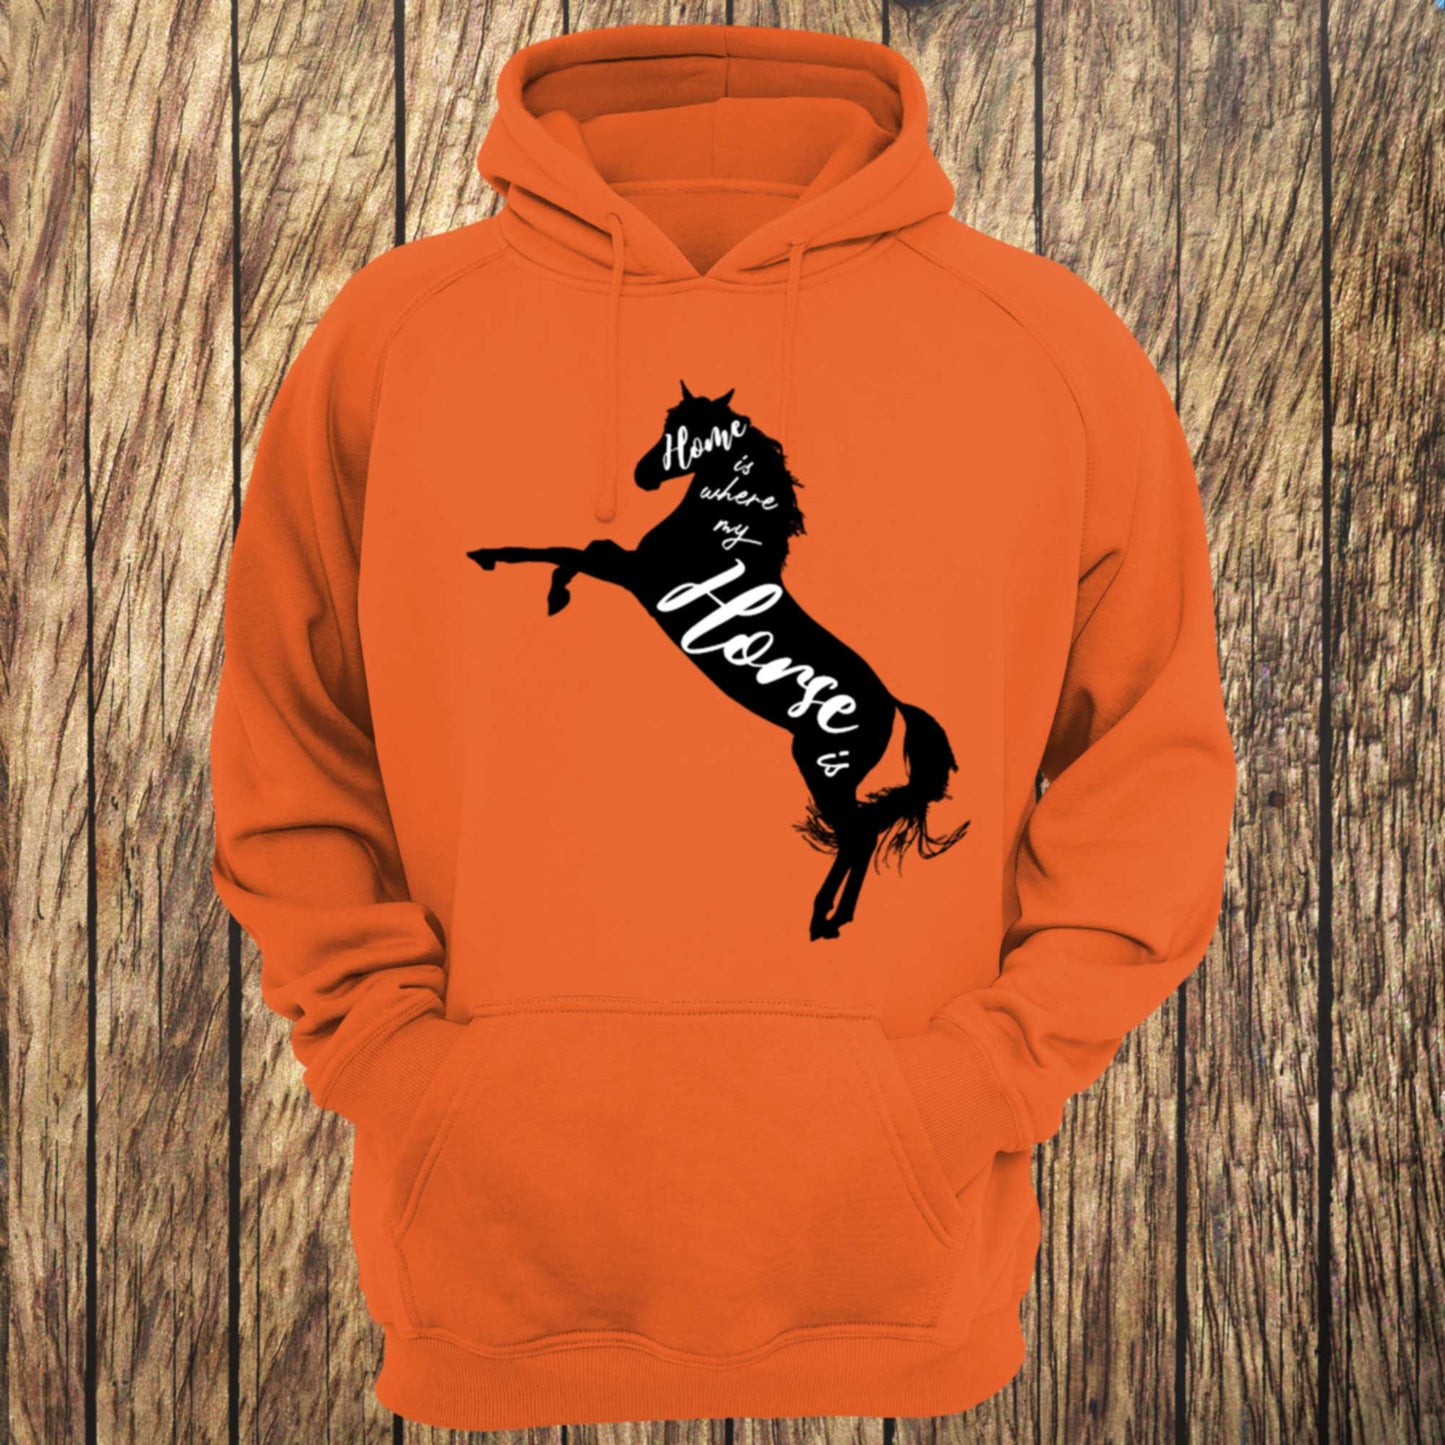 Home Is Where My Horse Is Typographic Unisex Hoodie